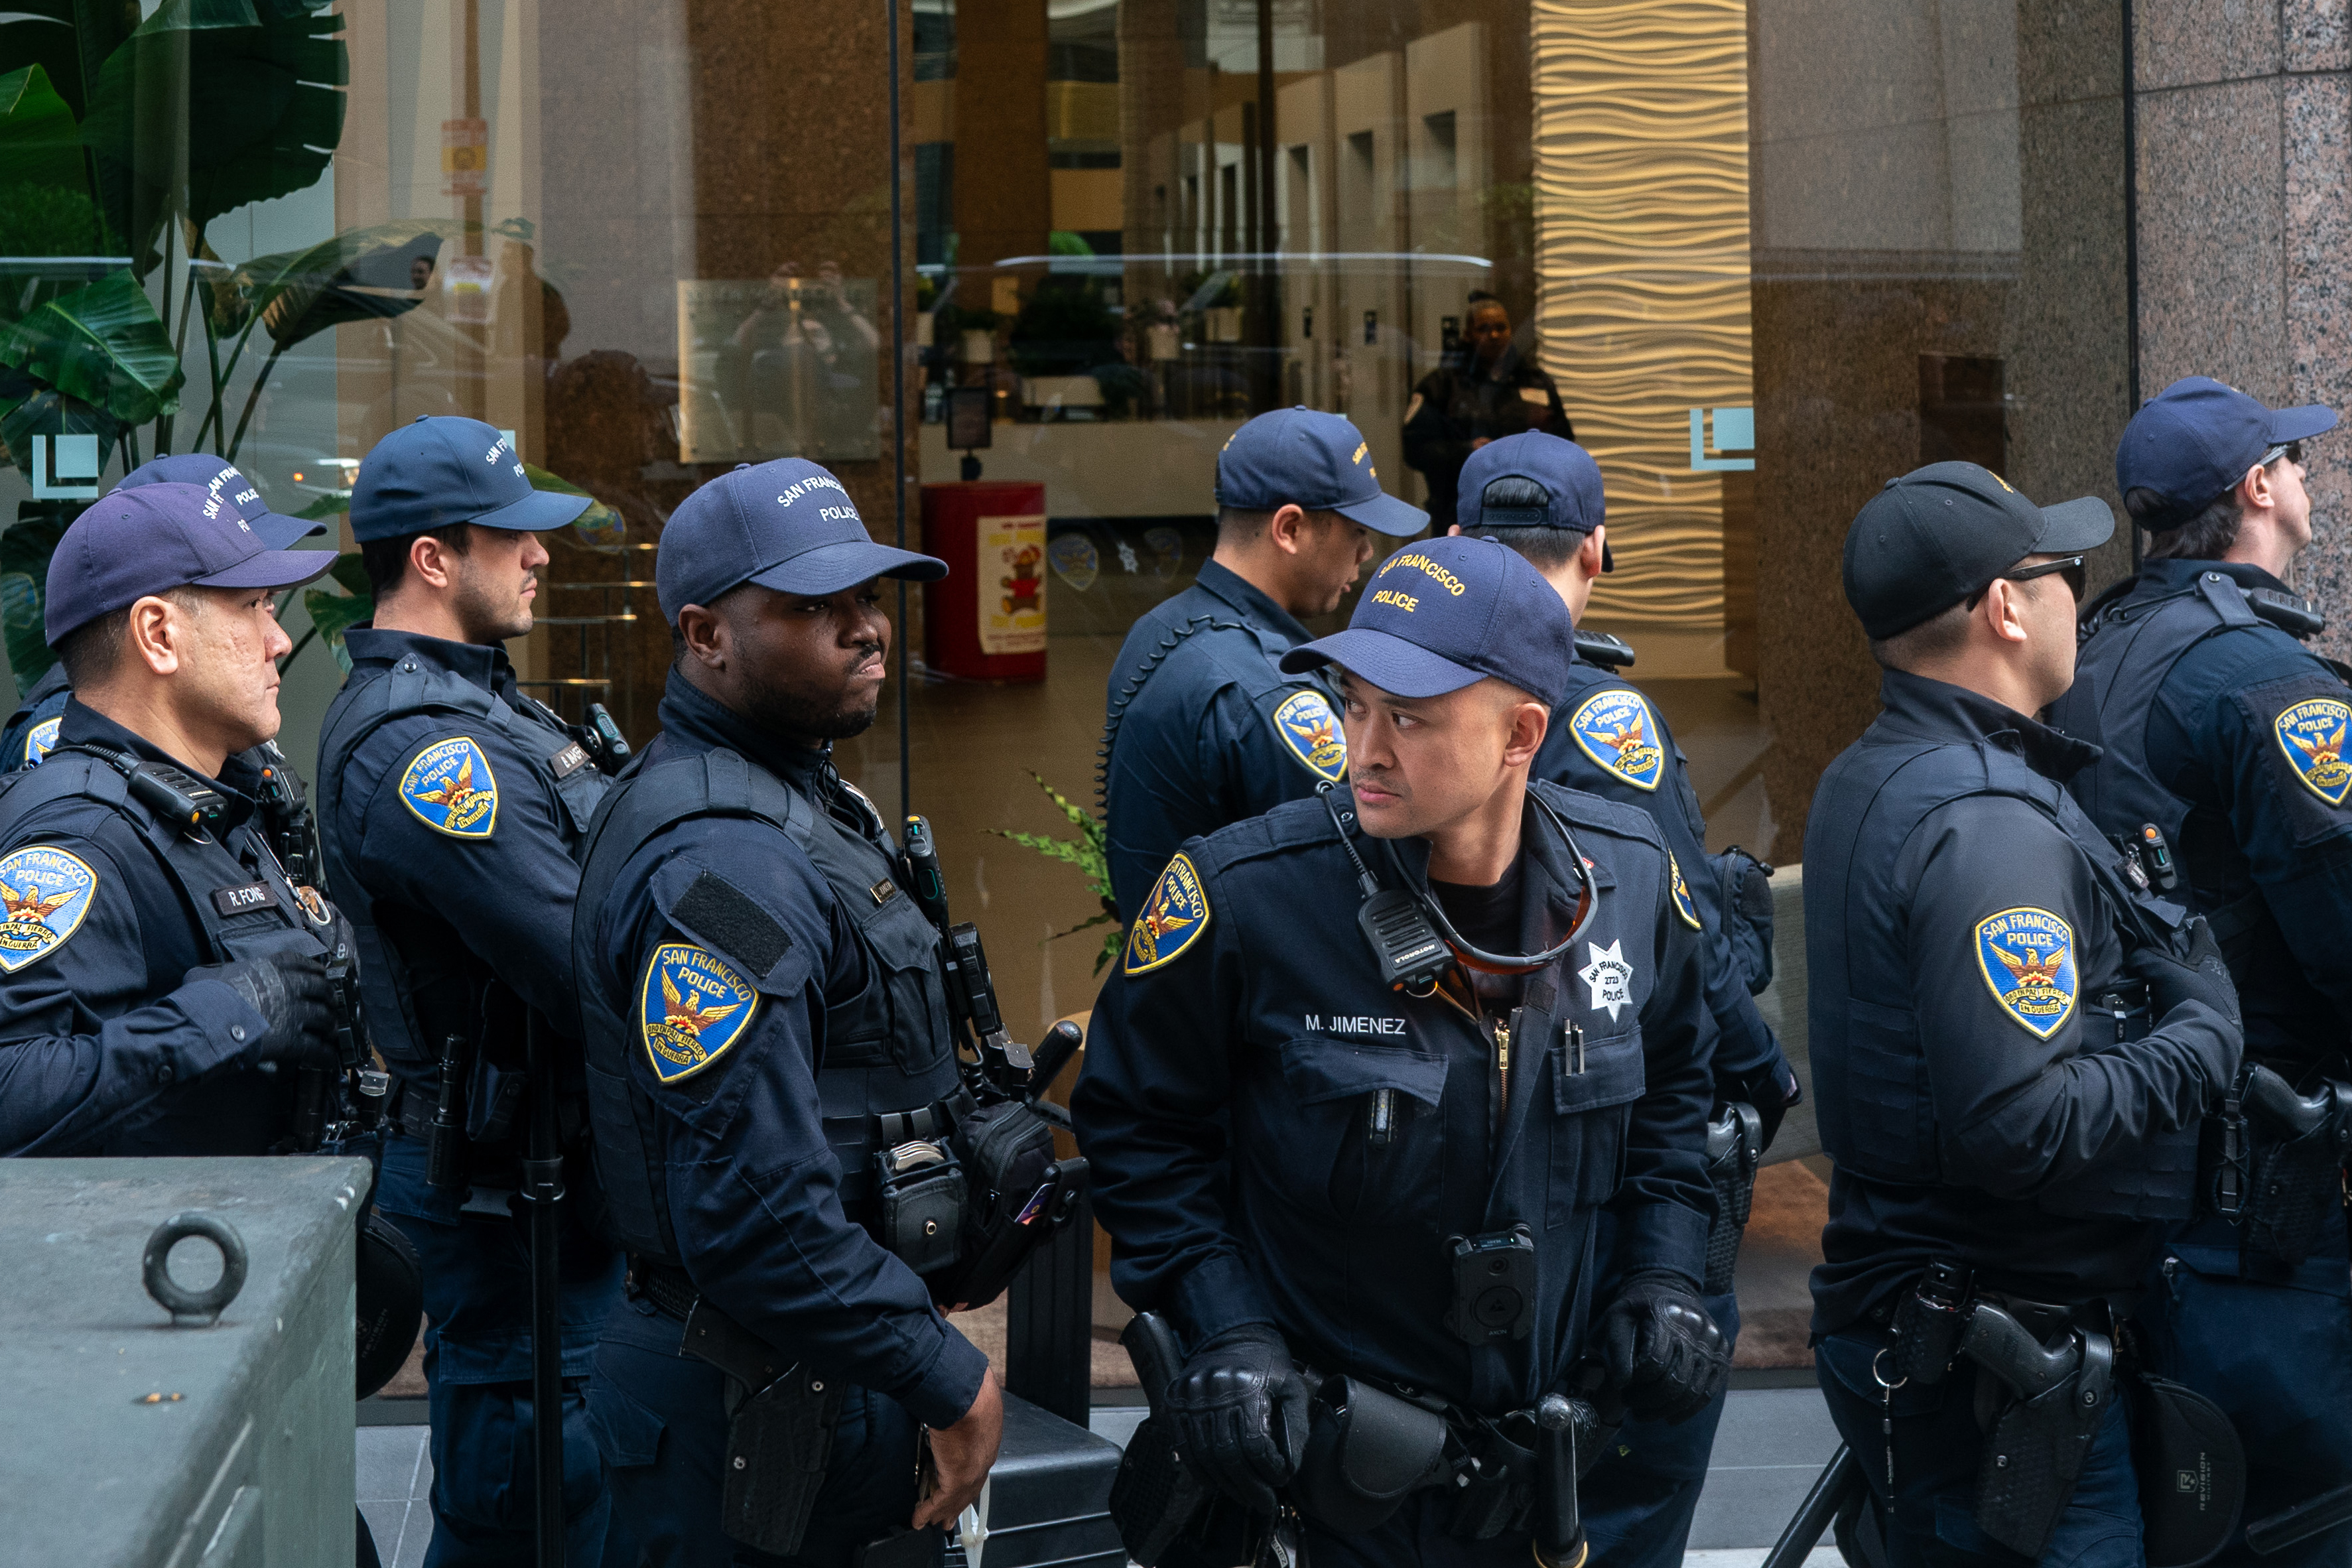 San Francisco Police are seen standing in a line next to a building with a large glass window.